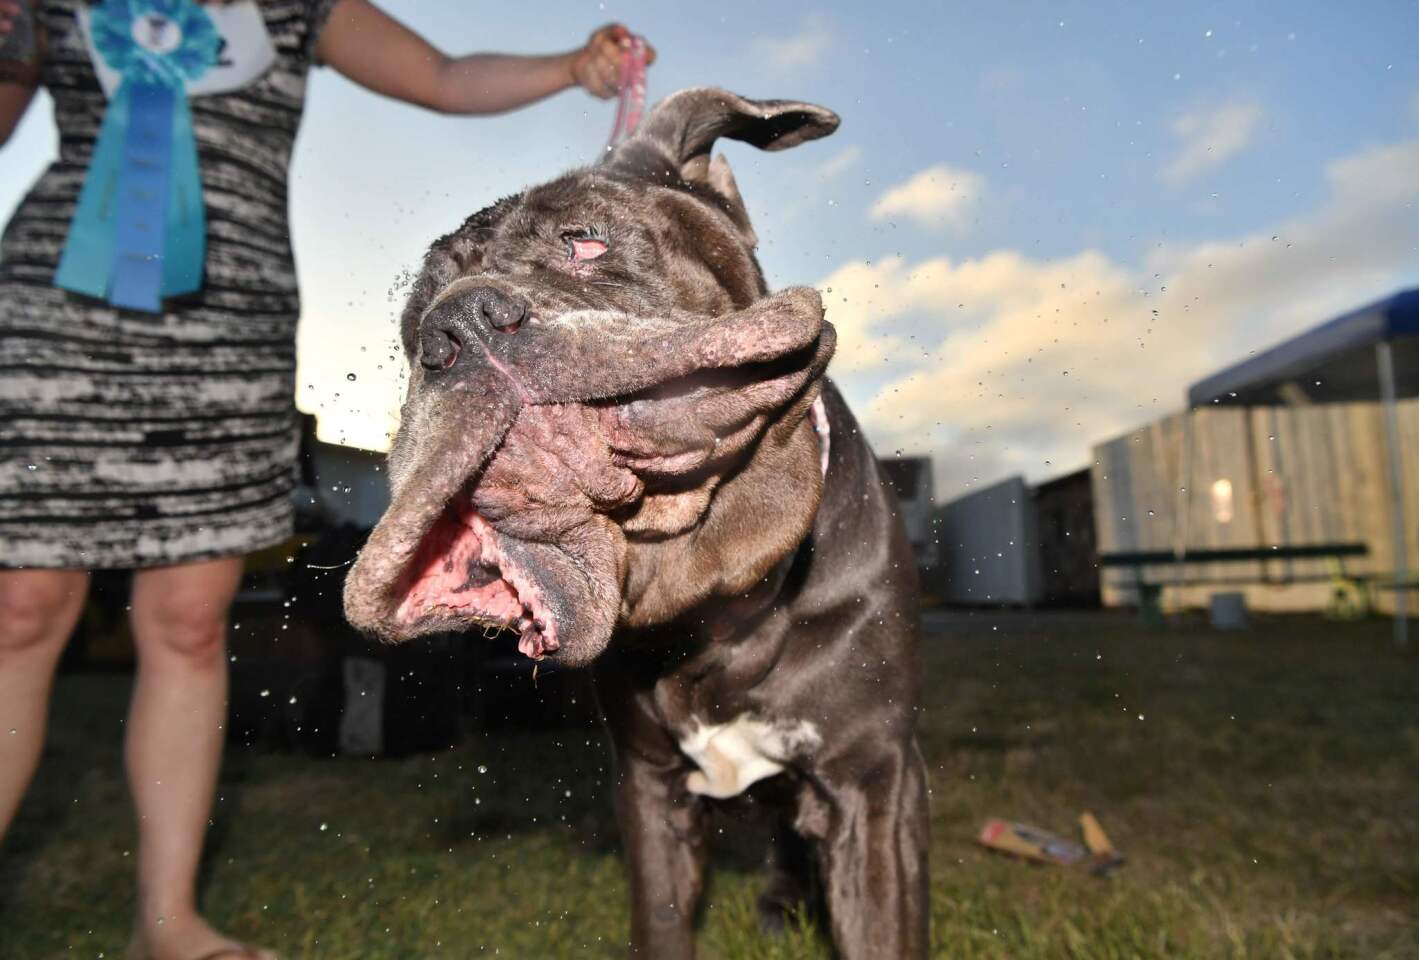 Martha, a Neapolitan Mastiff, shakes water off her head after winning this year's World's Ugliest Dog Competition in Petaluma.